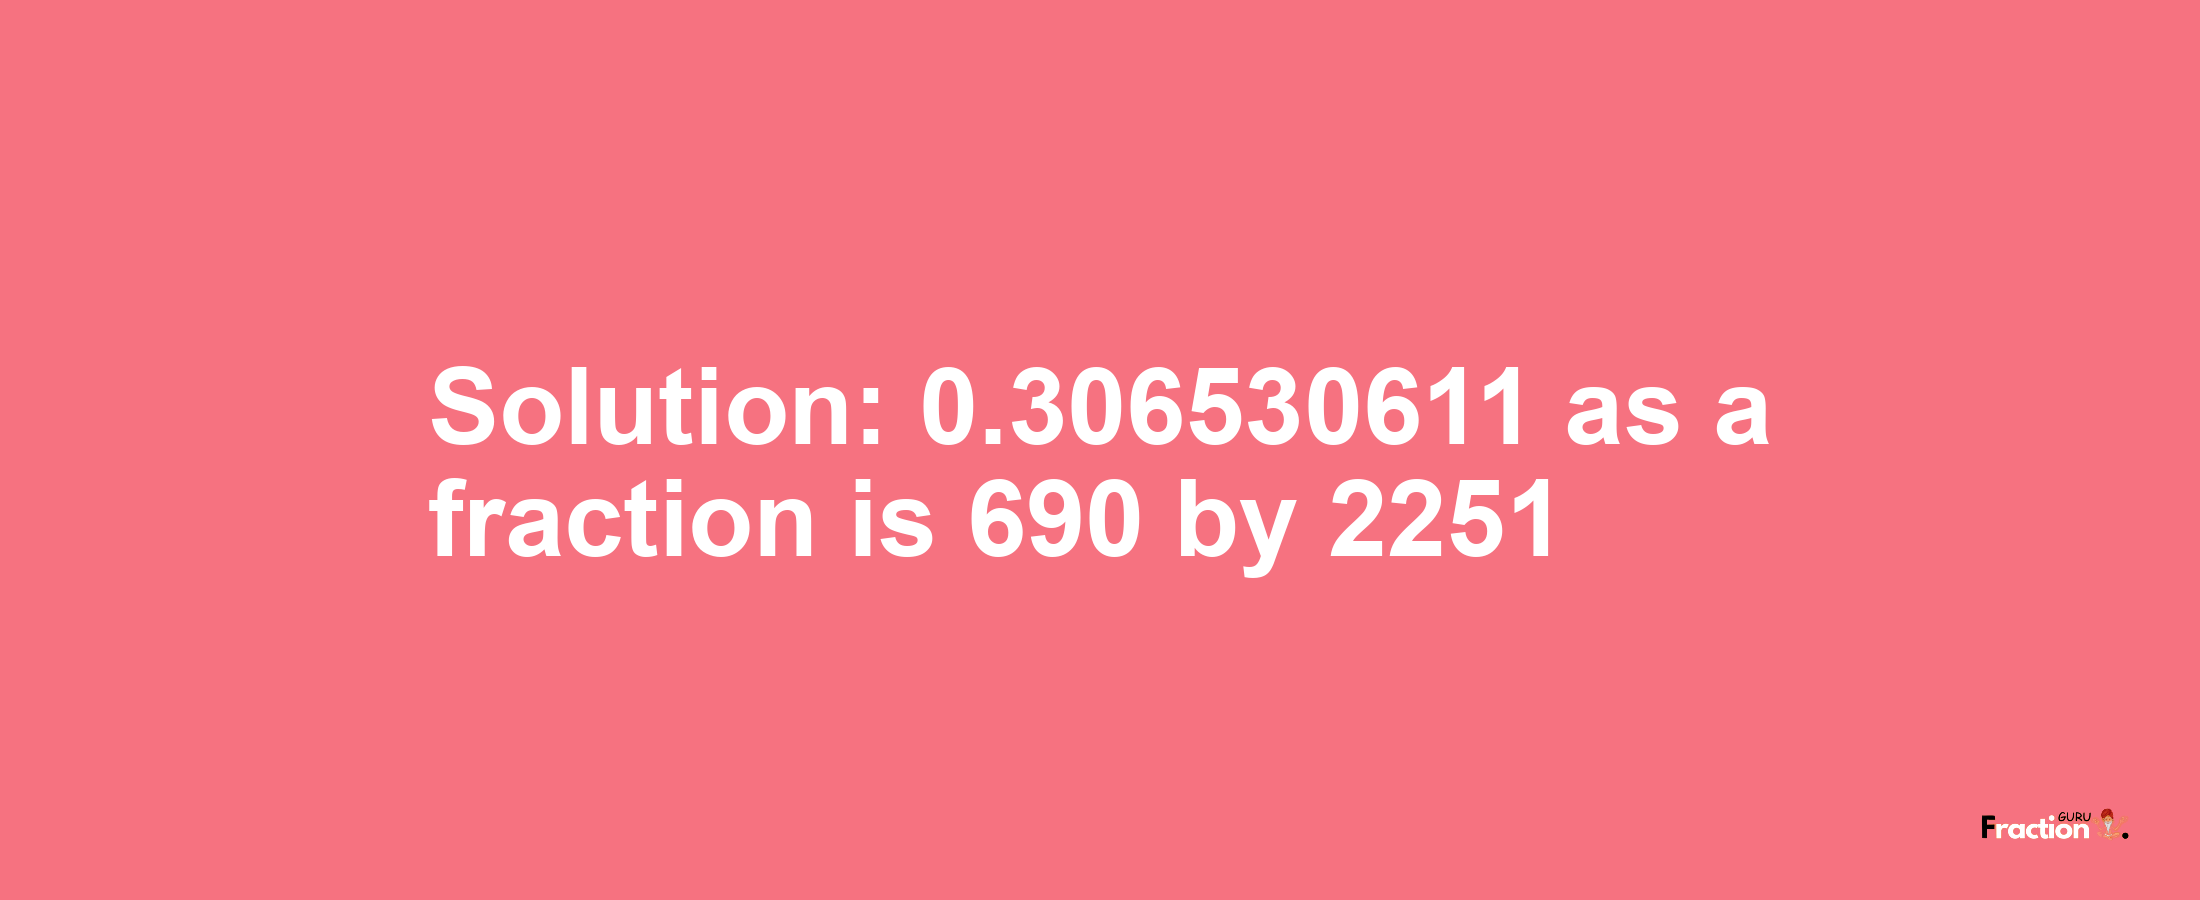 Solution:0.306530611 as a fraction is 690/2251